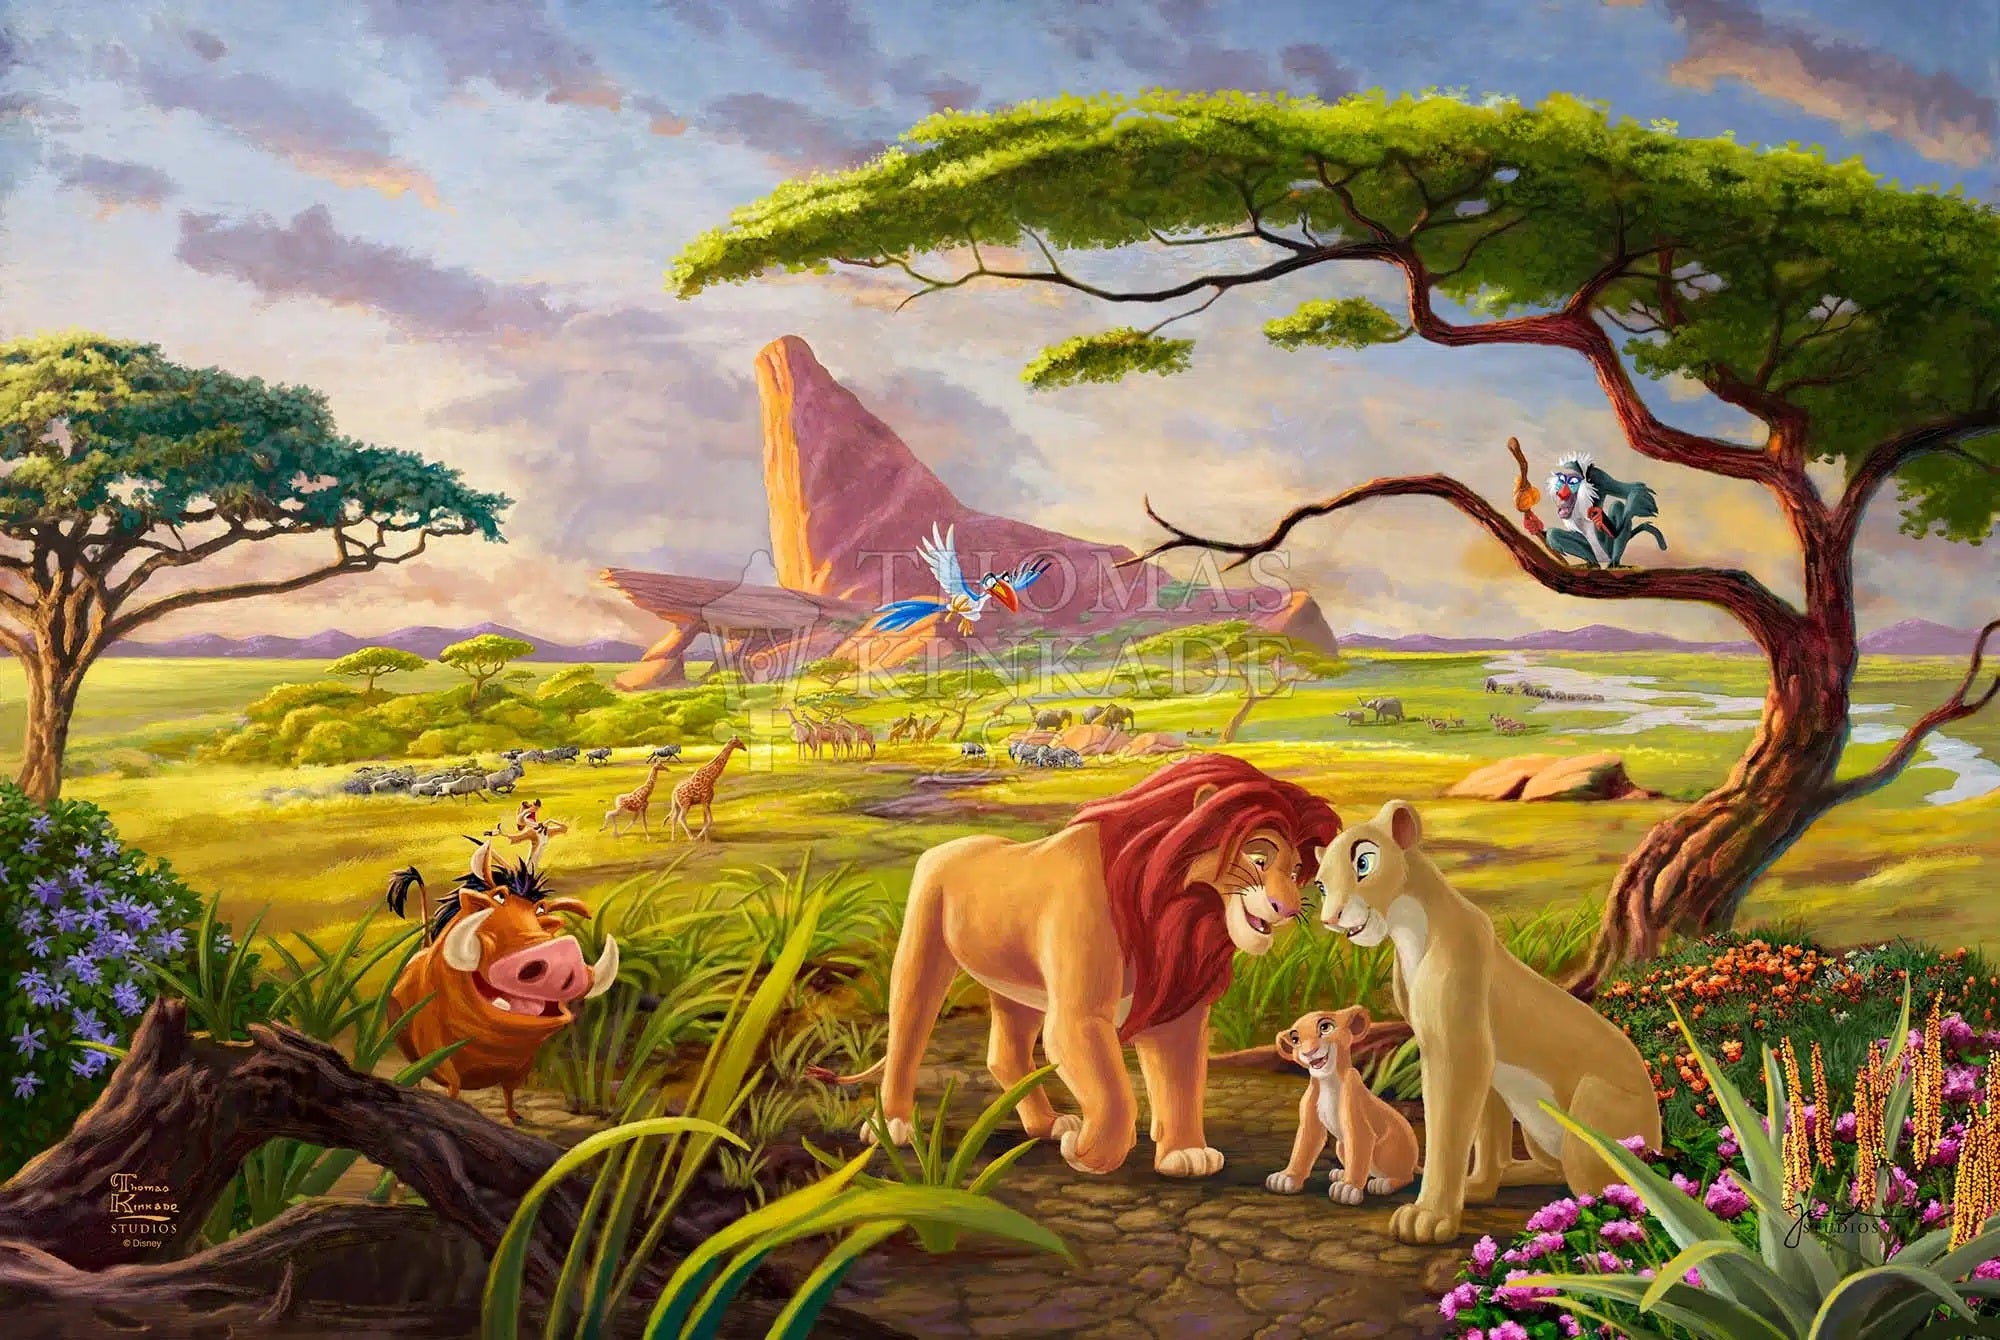 Unframed - Featuring Africa's lush and colorful plain stretches far behind Kiara, Nala, and Simba as the circle of life continues in harmony and balance.